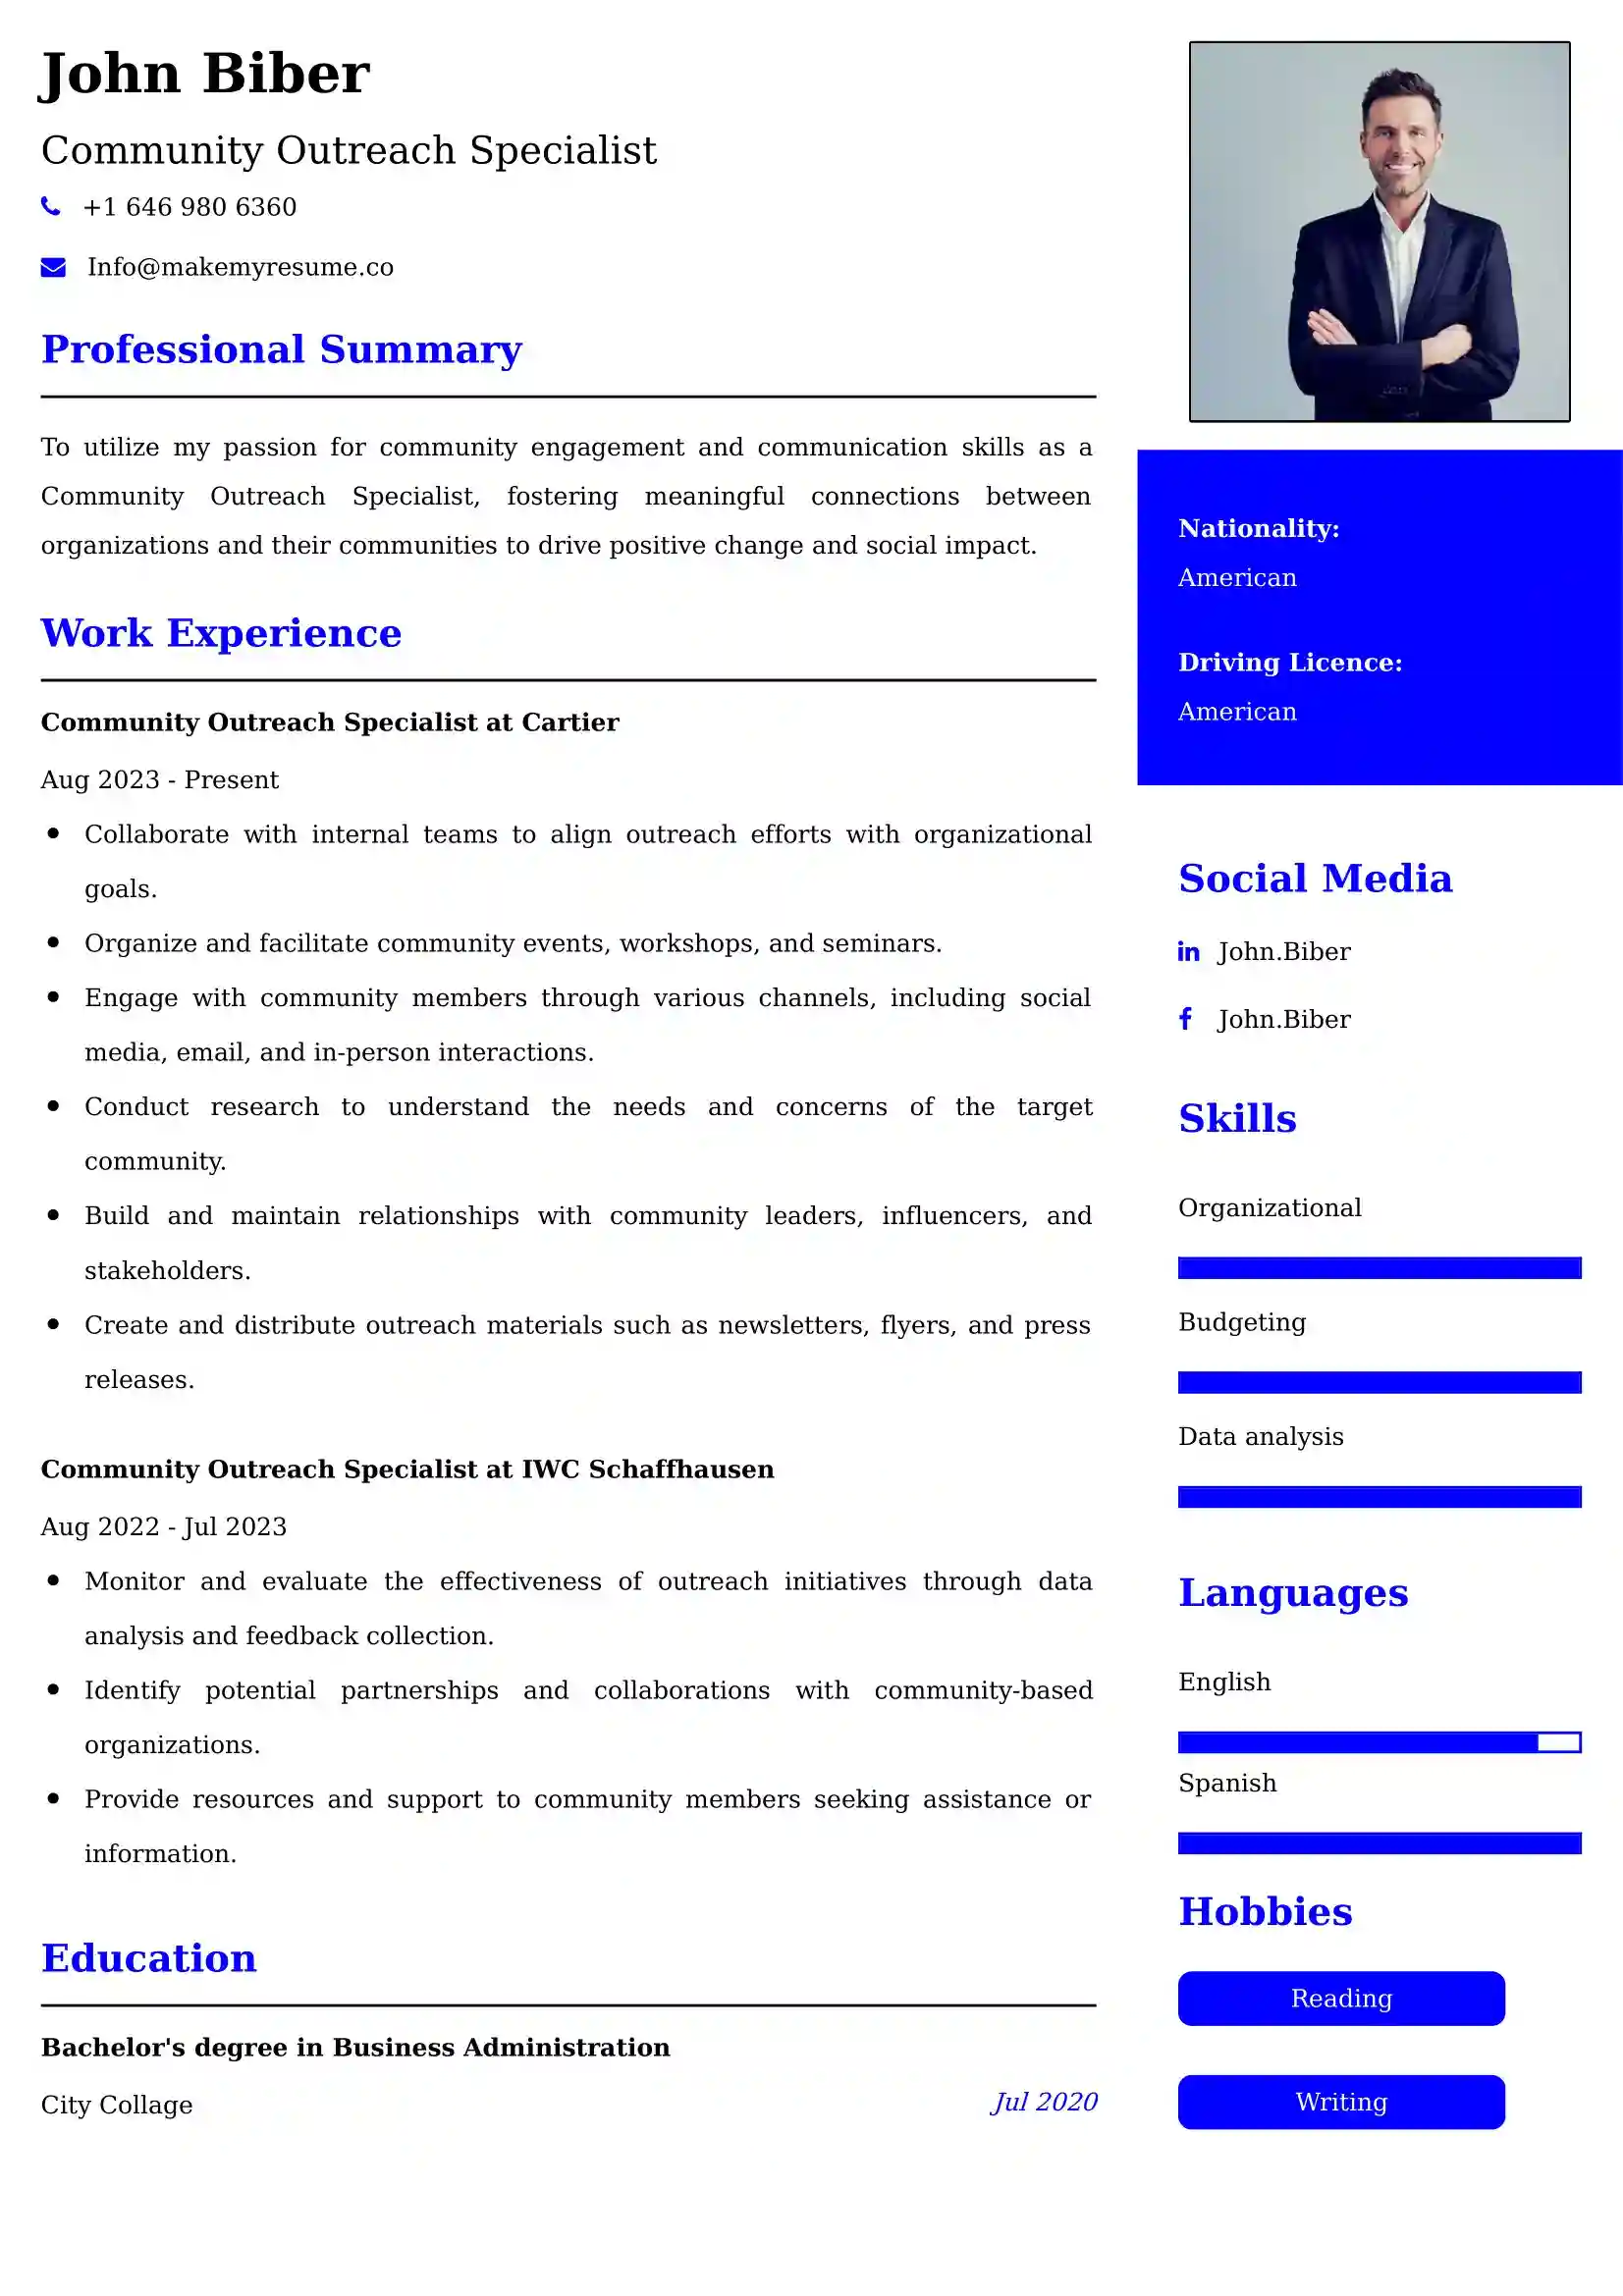 Community Outreach Specialist Resume Examples - Australian Format and Tips